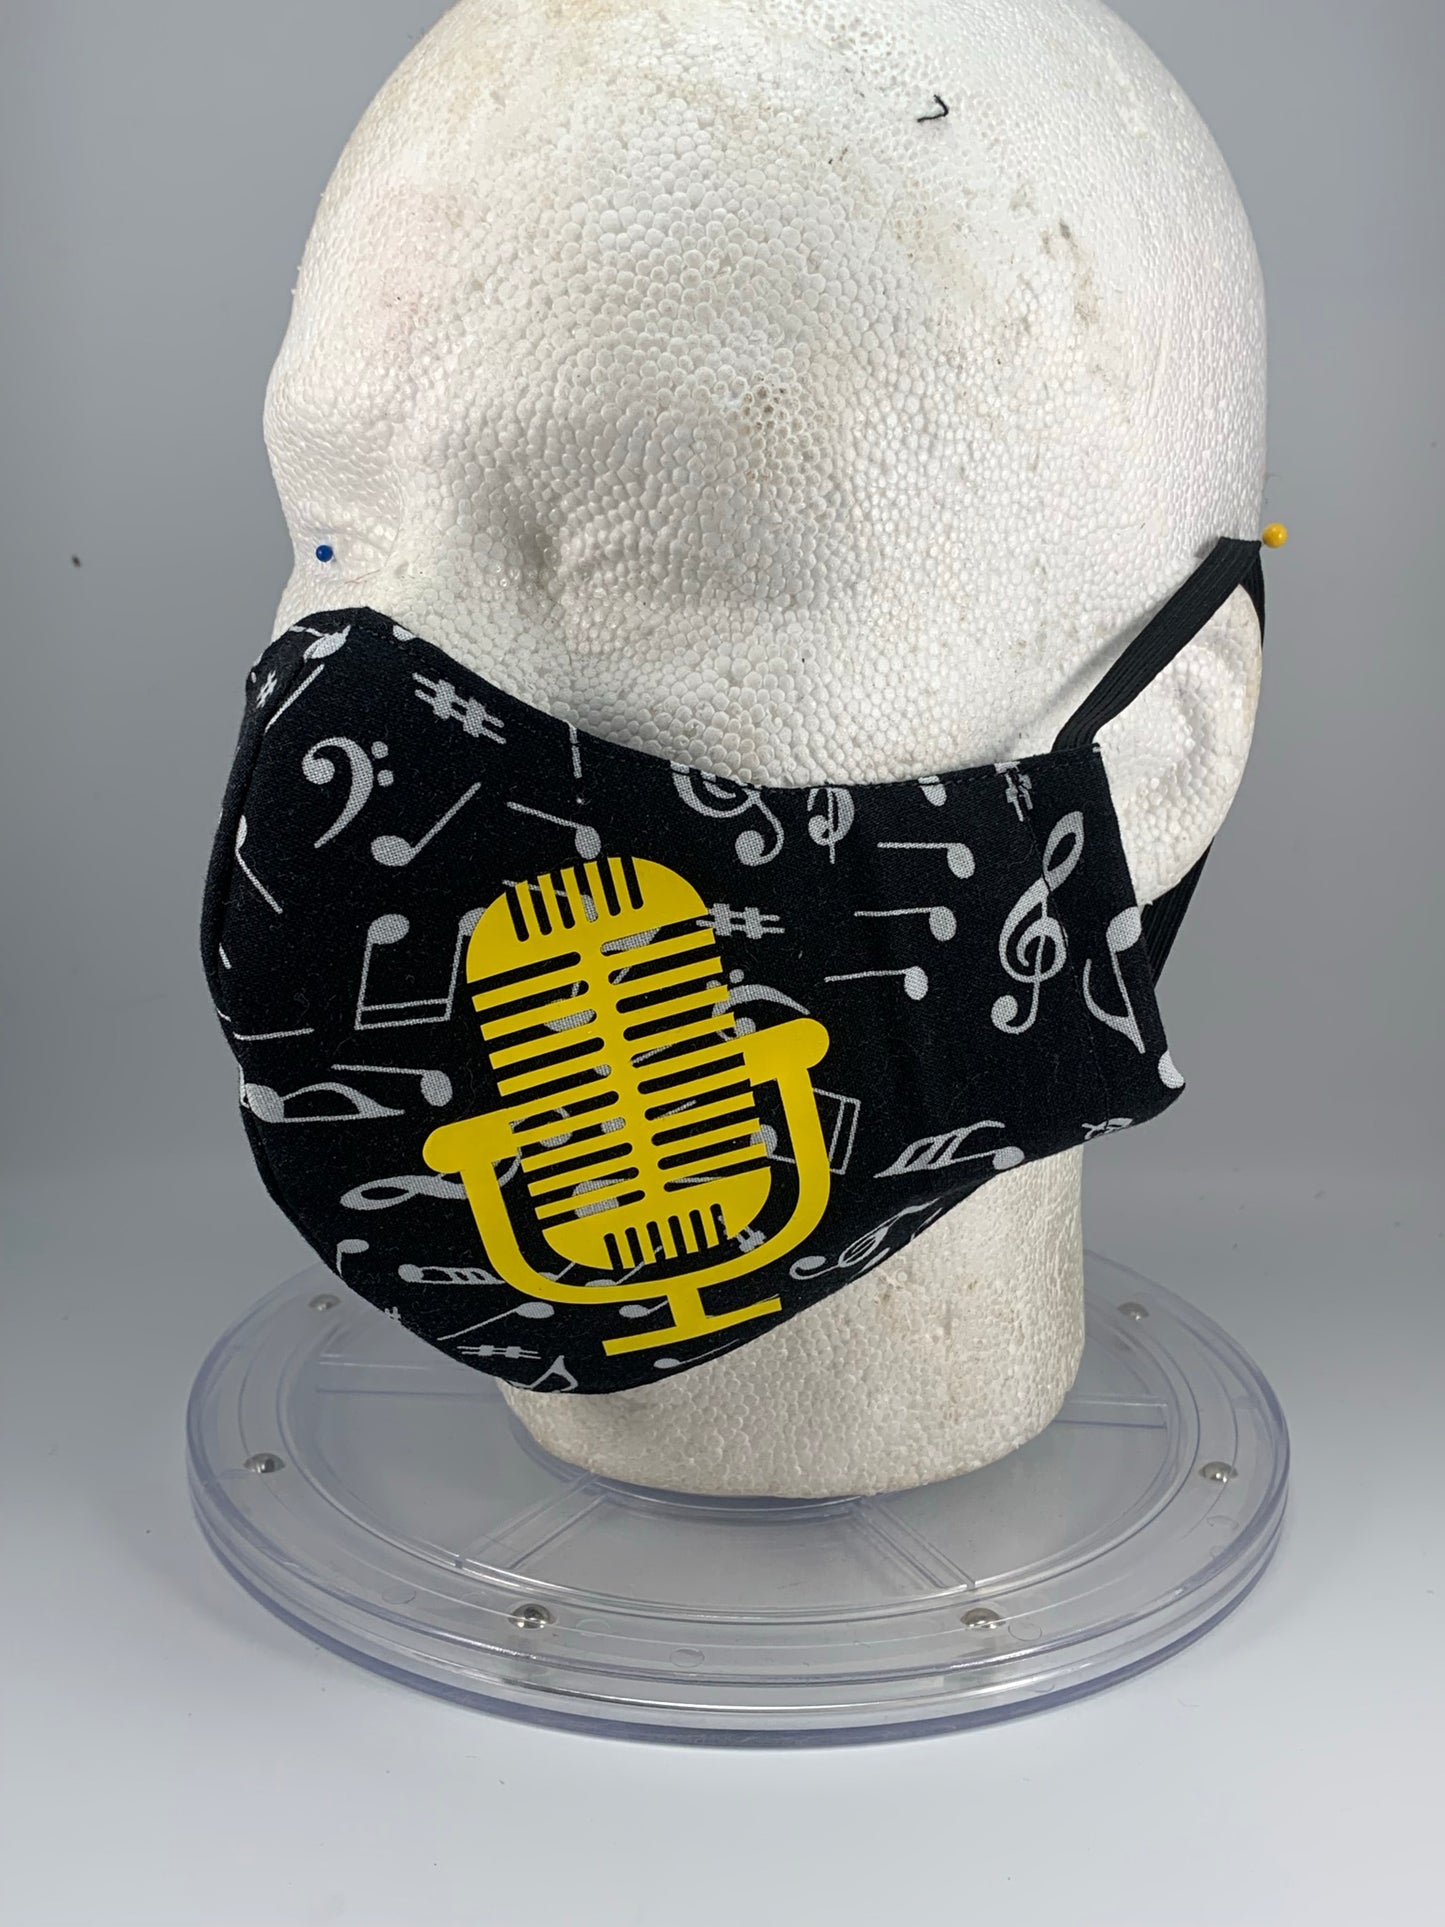 "On Air" Fabric Face Mask